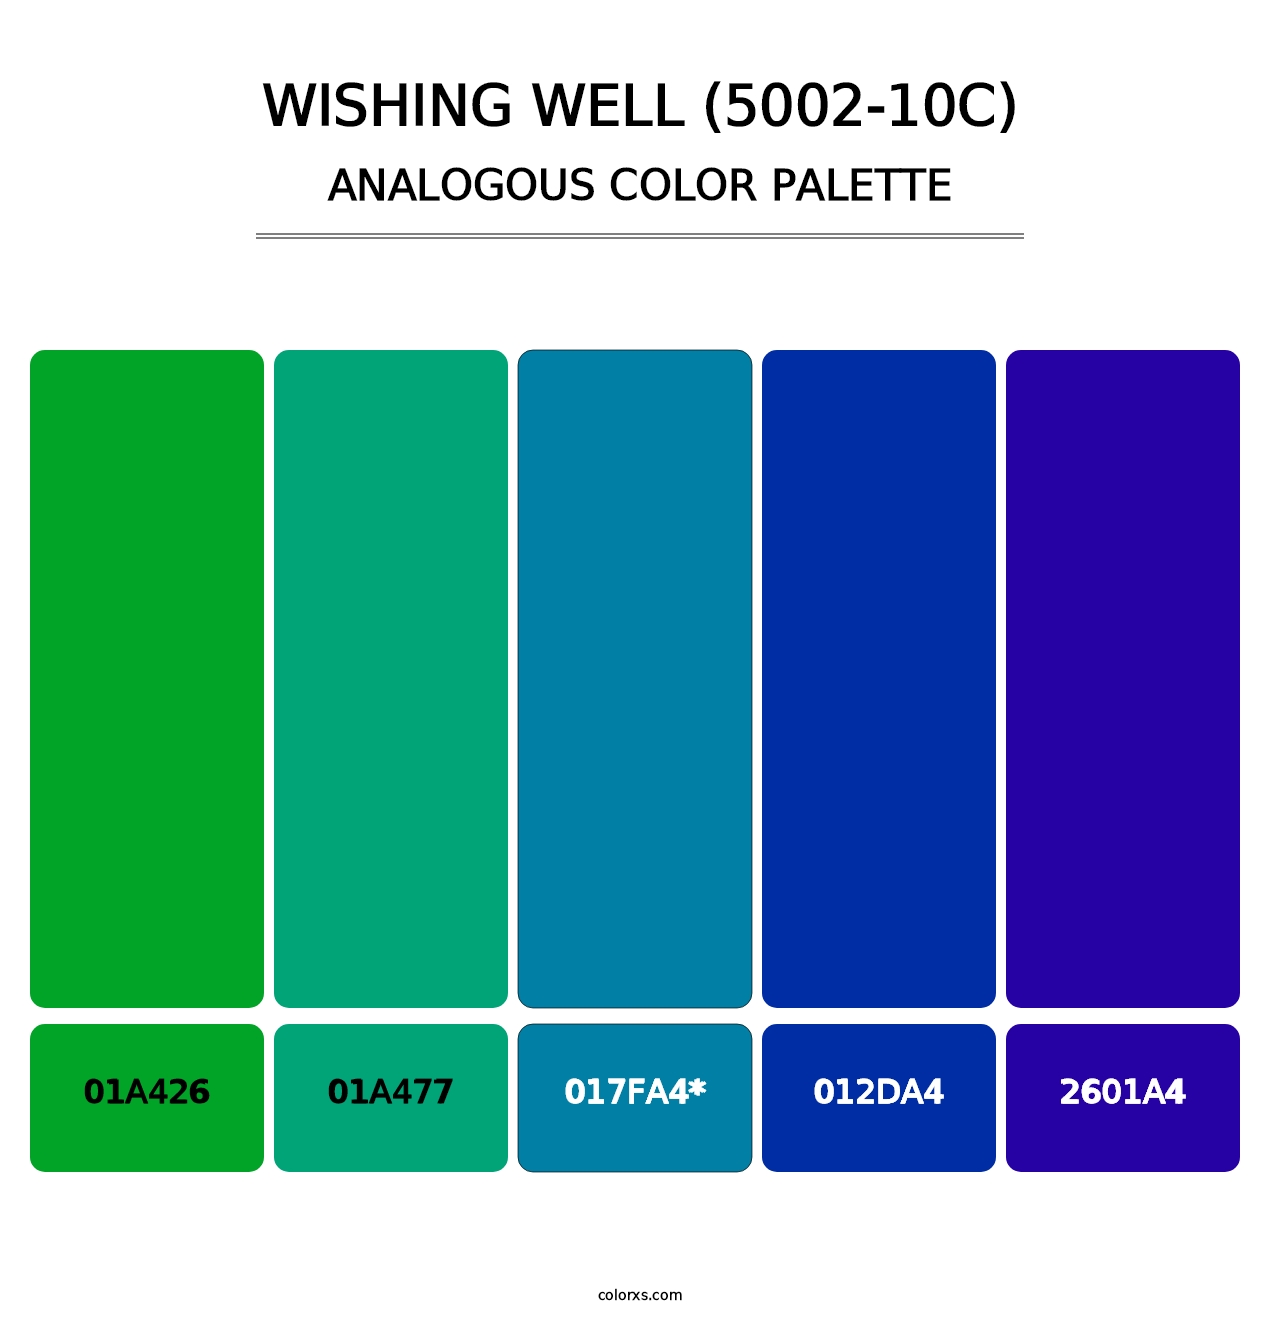 Wishing Well (5002-10C) - Analogous Color Palette